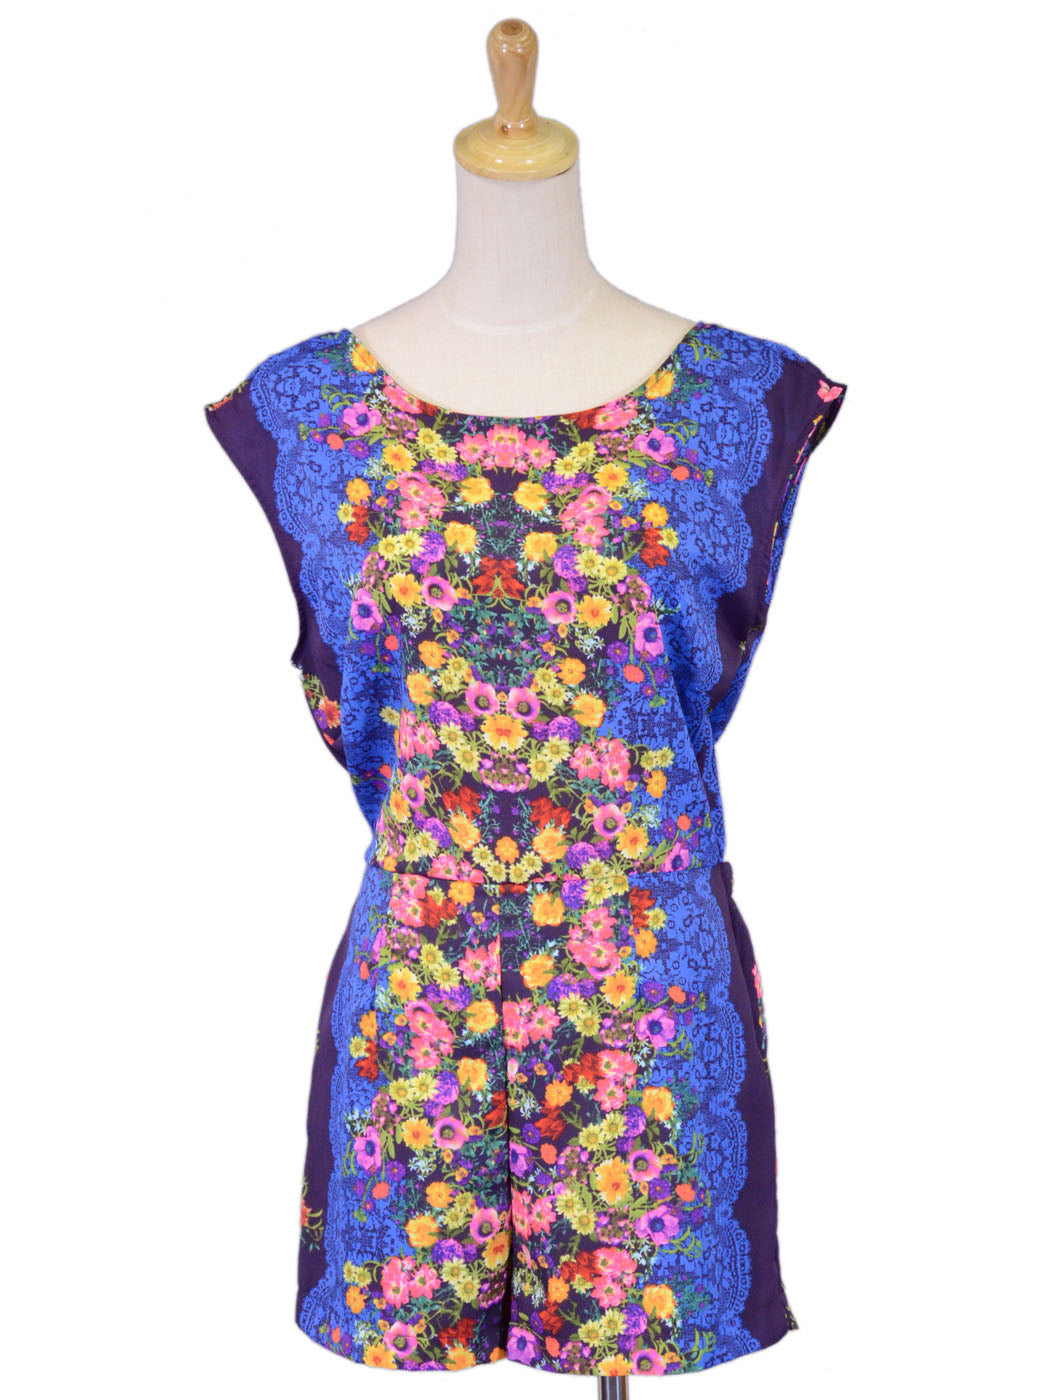 Moon Collection Enchanted Floral Prints Sleeveless Open Back Woven Romper - ALILANG.COM